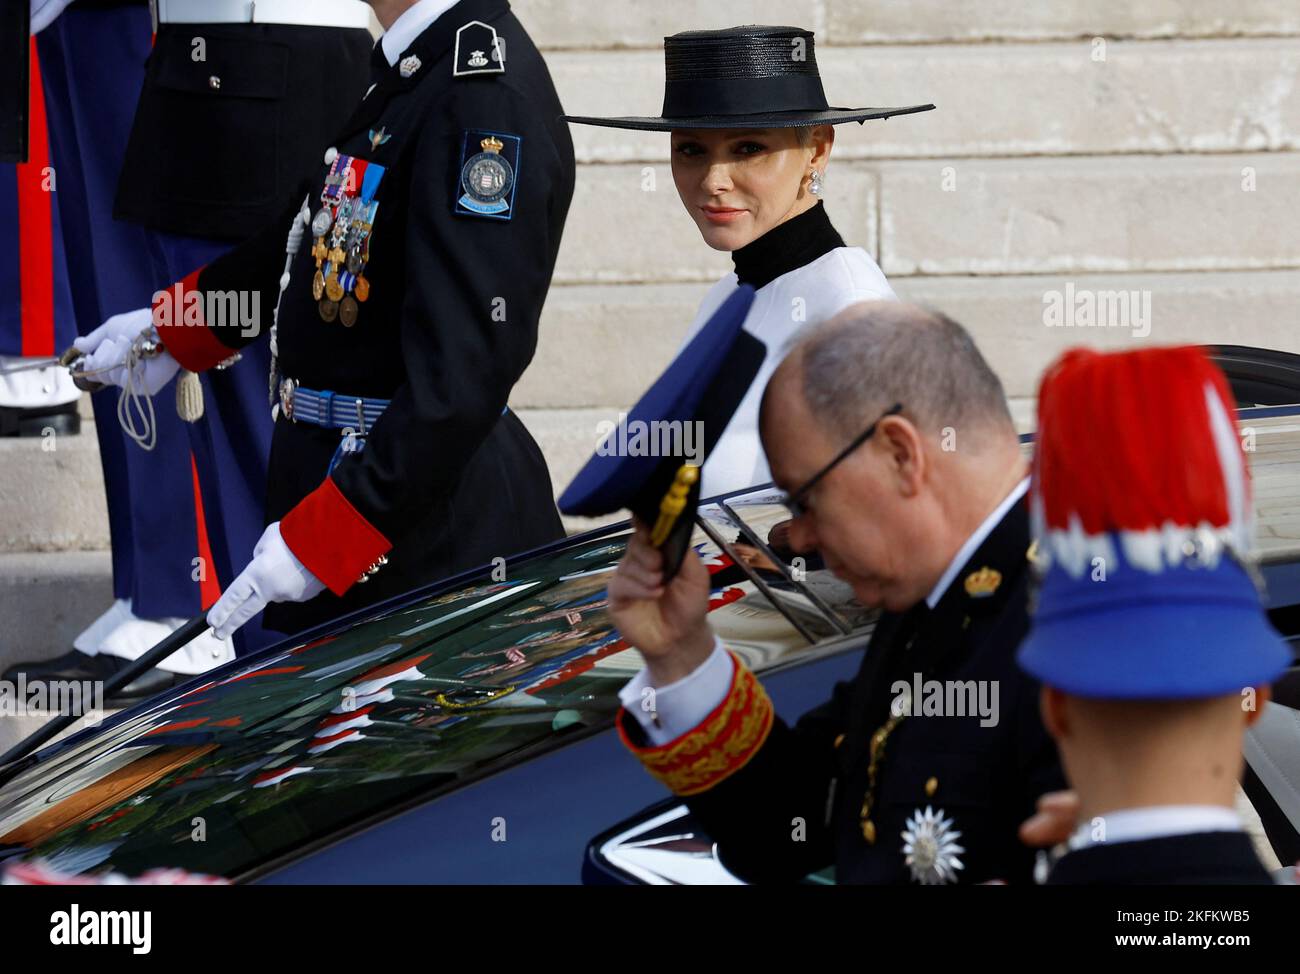 Prince Albert II of Monaco and Princess Charlene arrive to attend a mass at Monaco Cathedral during the celebrations marking Monaco's National Day, November 19, 2022. REUTERS/Eric Gaillard Stock Photo